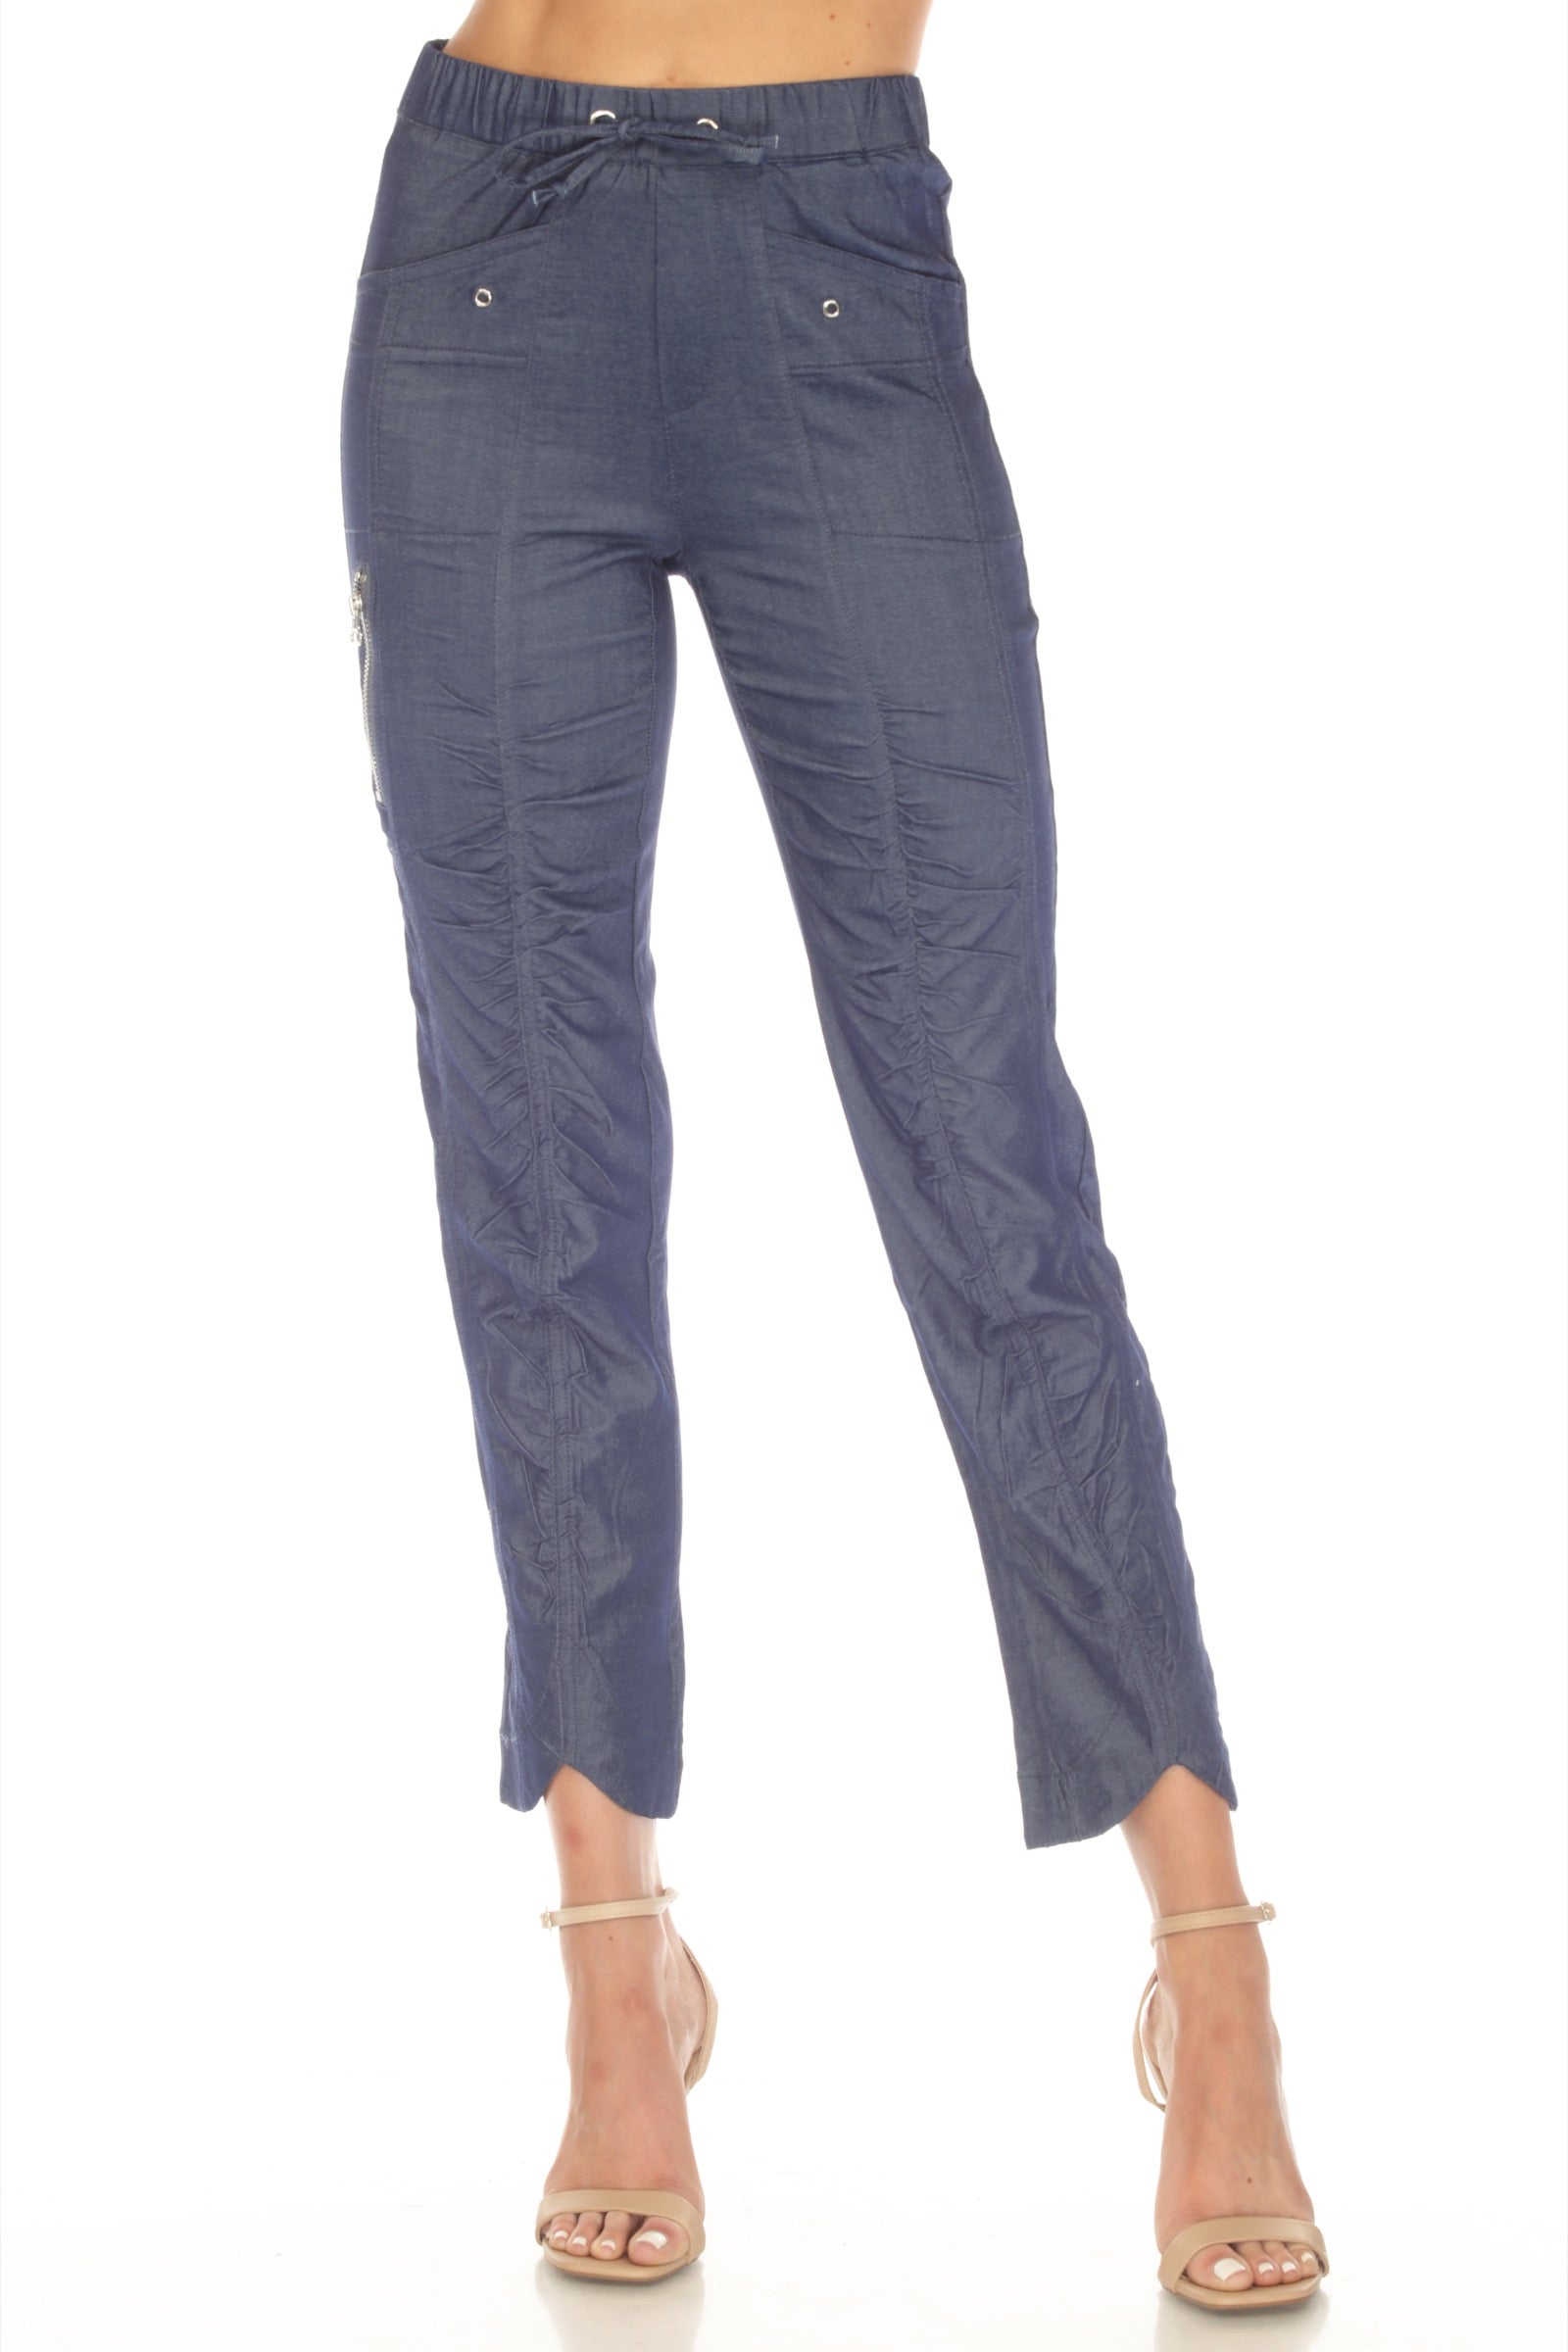 Ruched Scallop Cargo Pant - CARINE